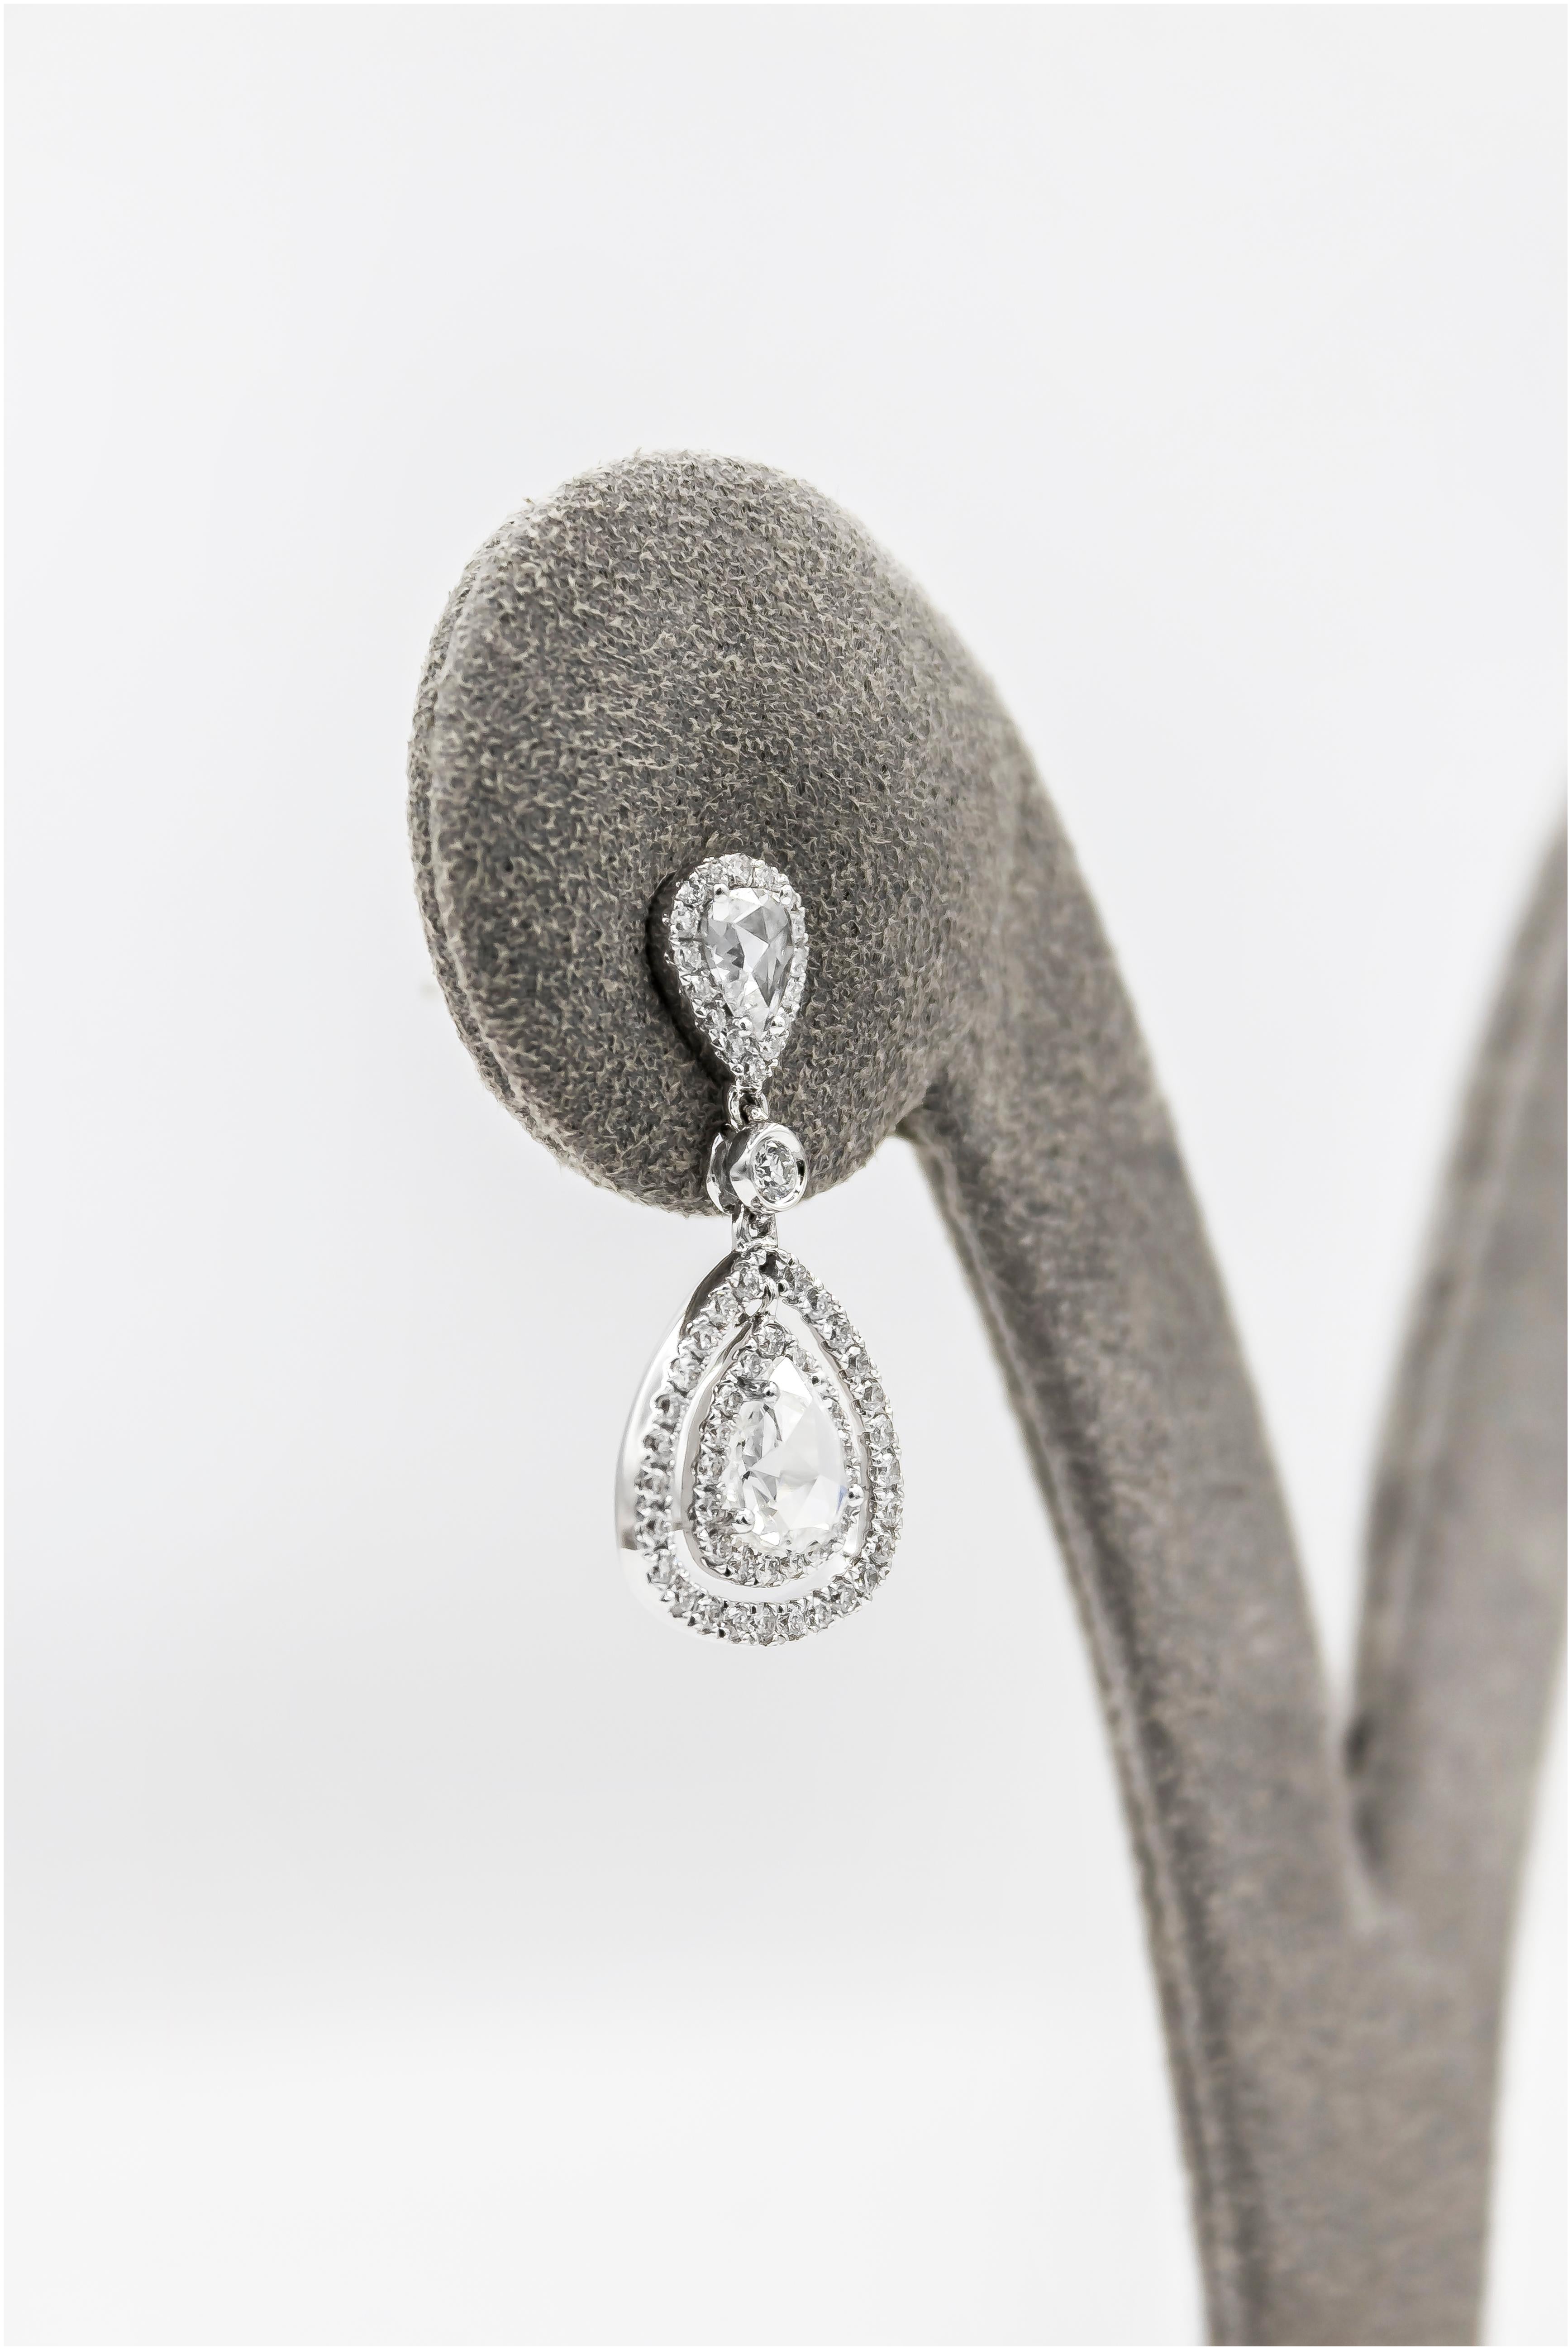 Showcasing a beautiful pear shape diamonds, set in a double halo of open-work design. Suspended on a bezel set diamond and pear shape diamonds in a halo design. Diamonds weigh 1.53 carats total and Finely made in 18k white gold.

Style available in